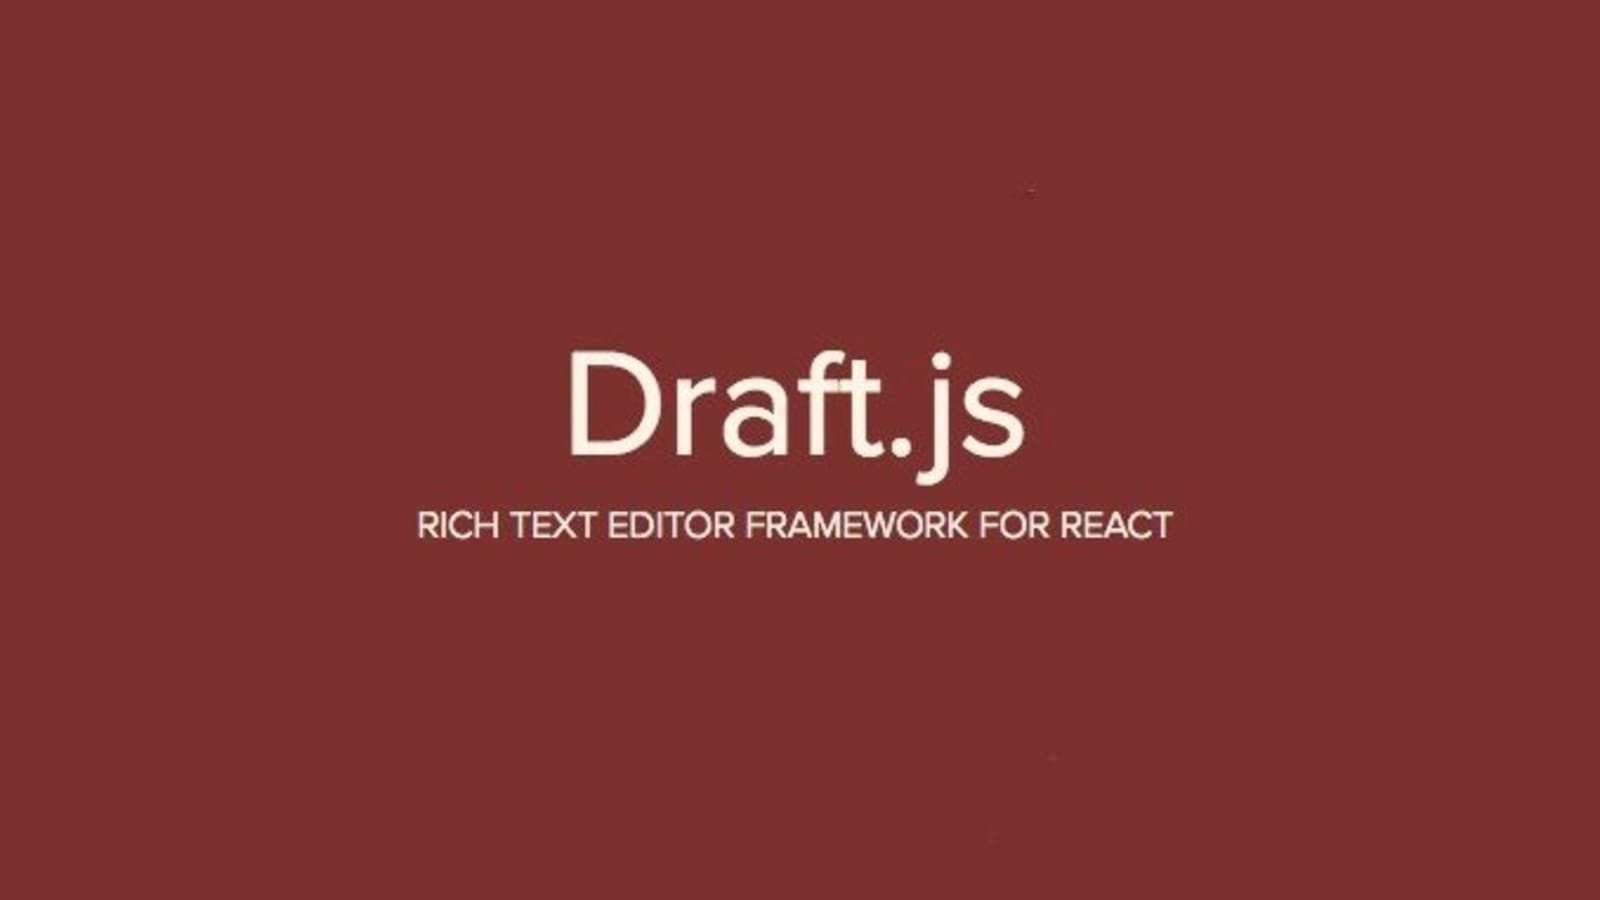 reactjs - How can I implement draft-js generated html code to my